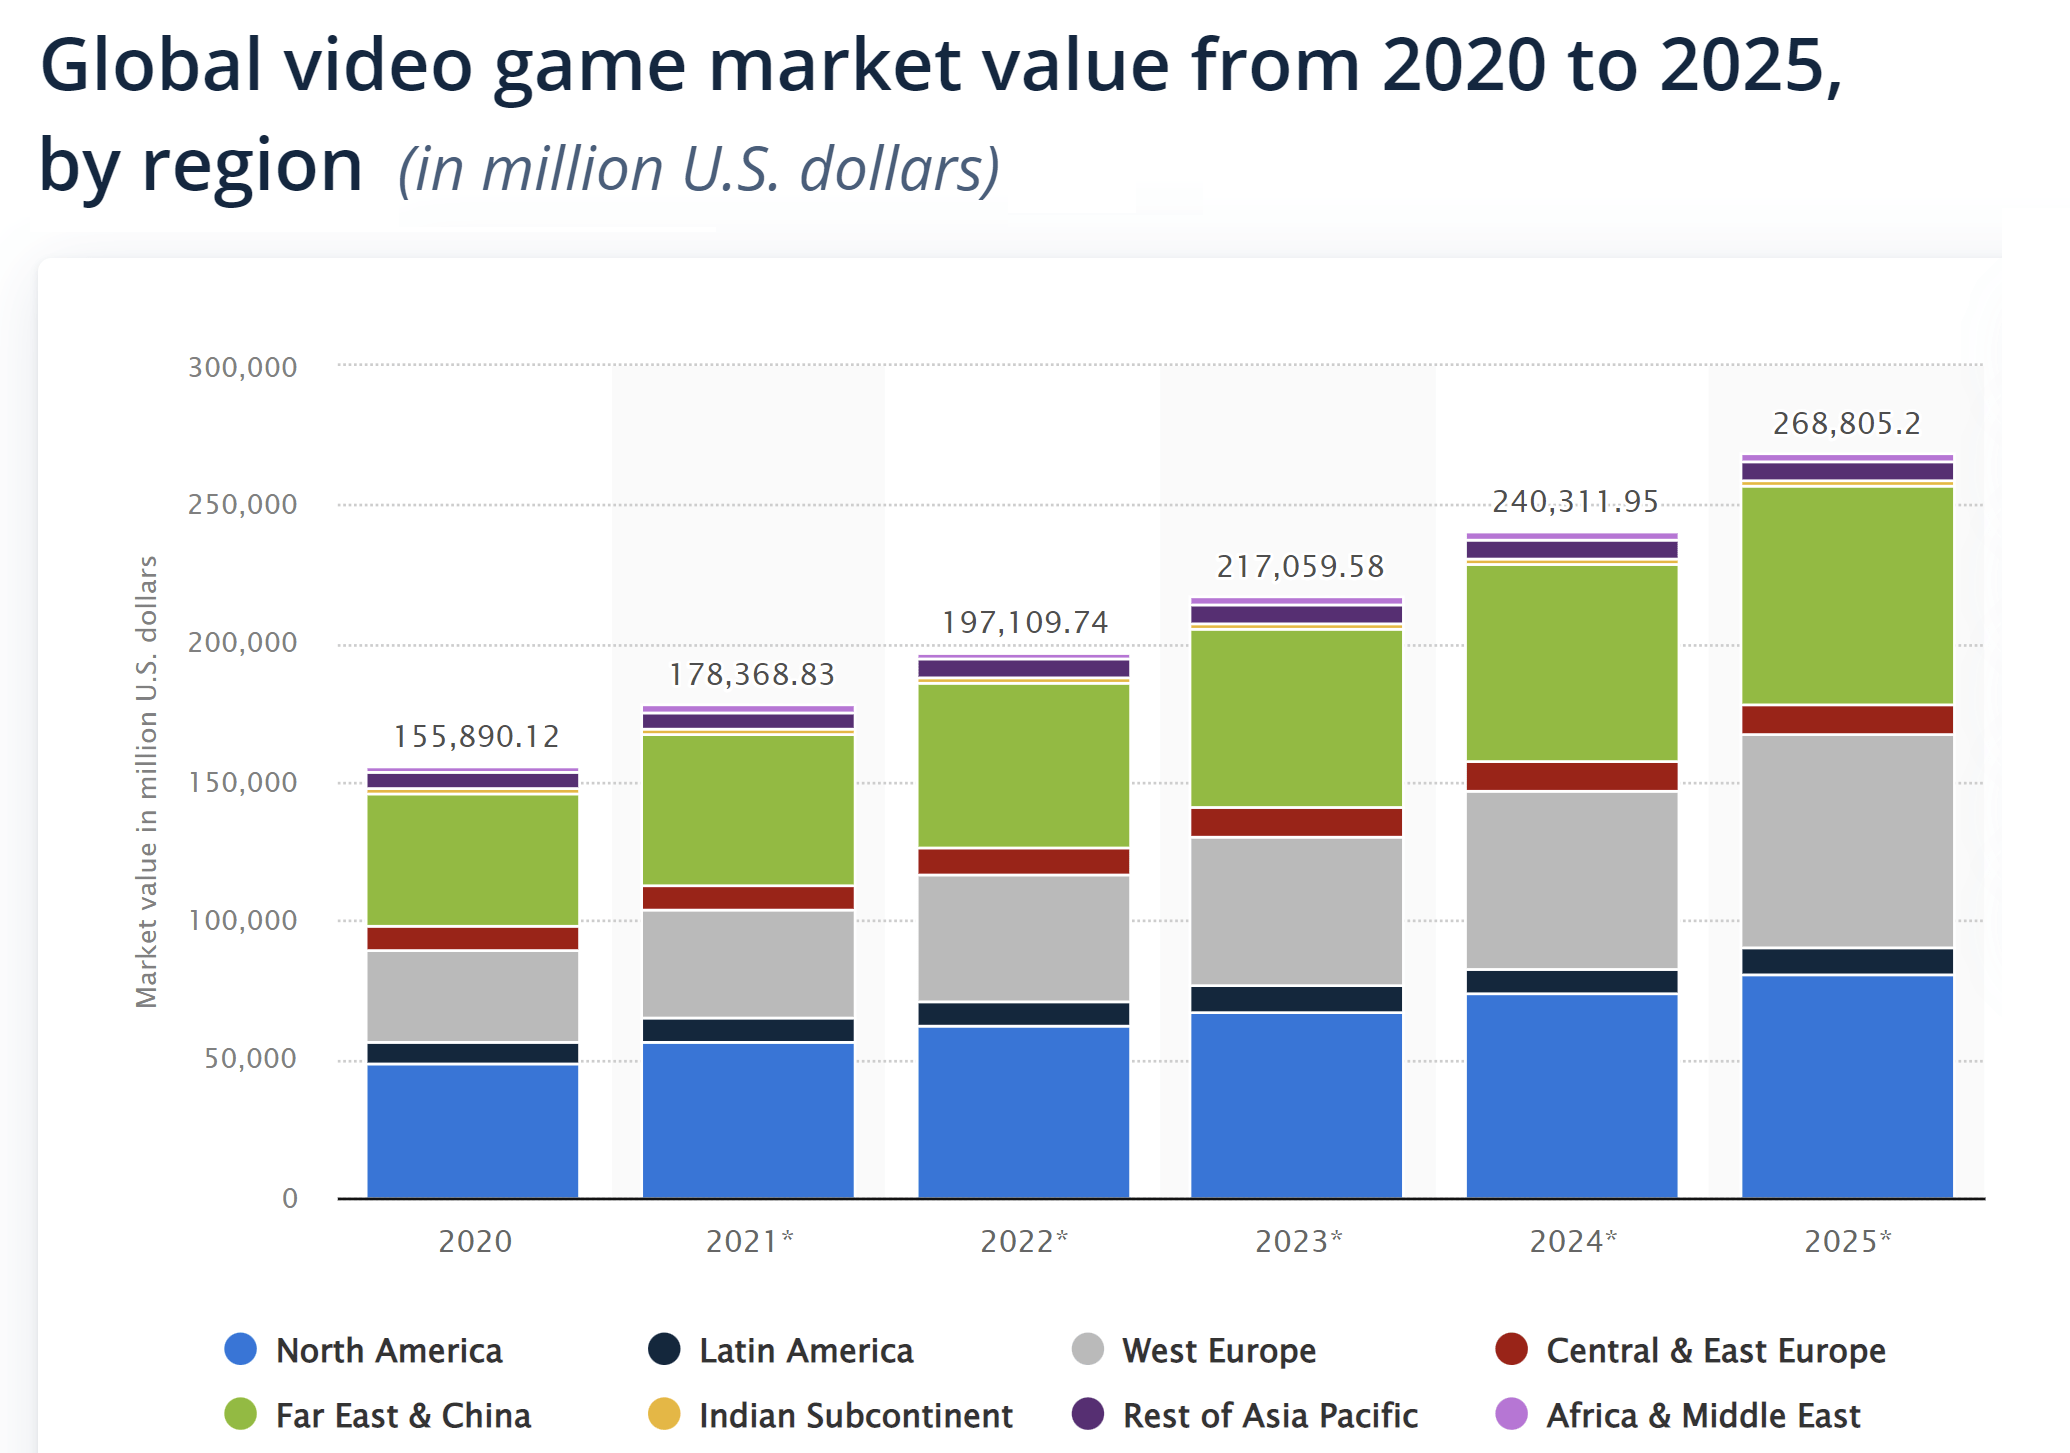 Take-Two Interactive Stock Up 300% Over Last 5 Years: What's Next?